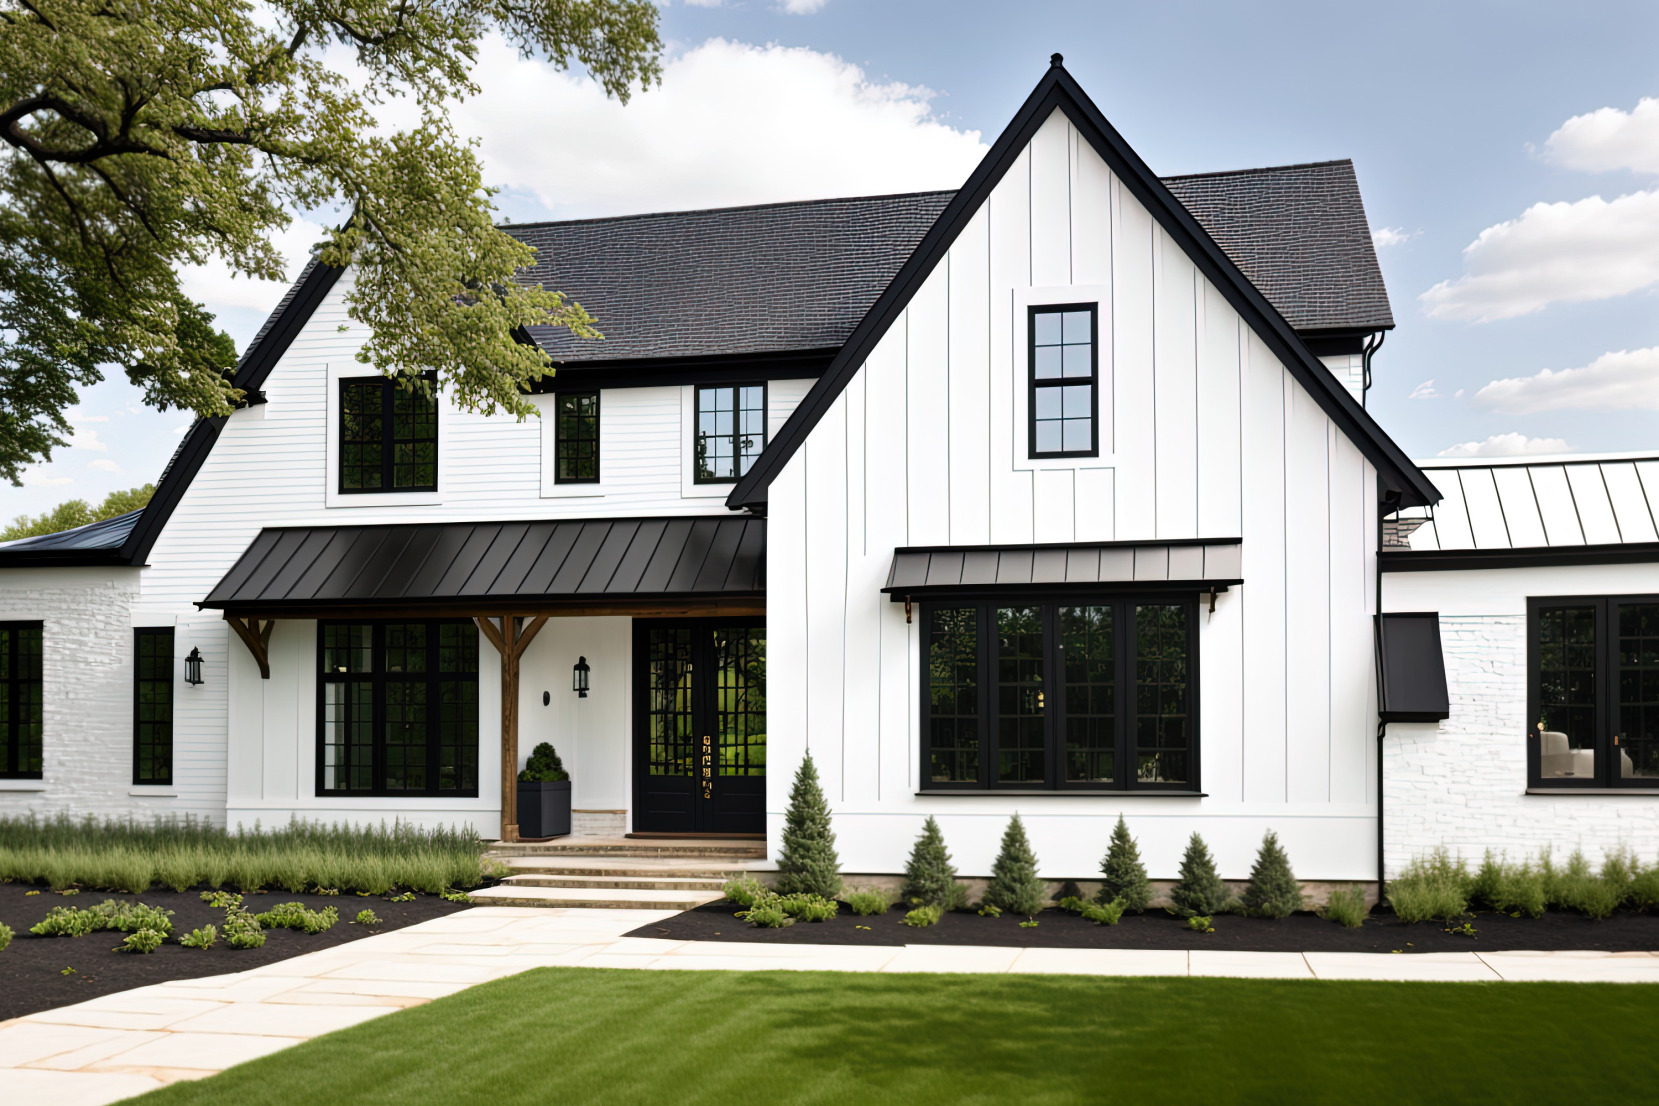 Brand-new contemporary white farmhouse with dark shingled roof and black windows 